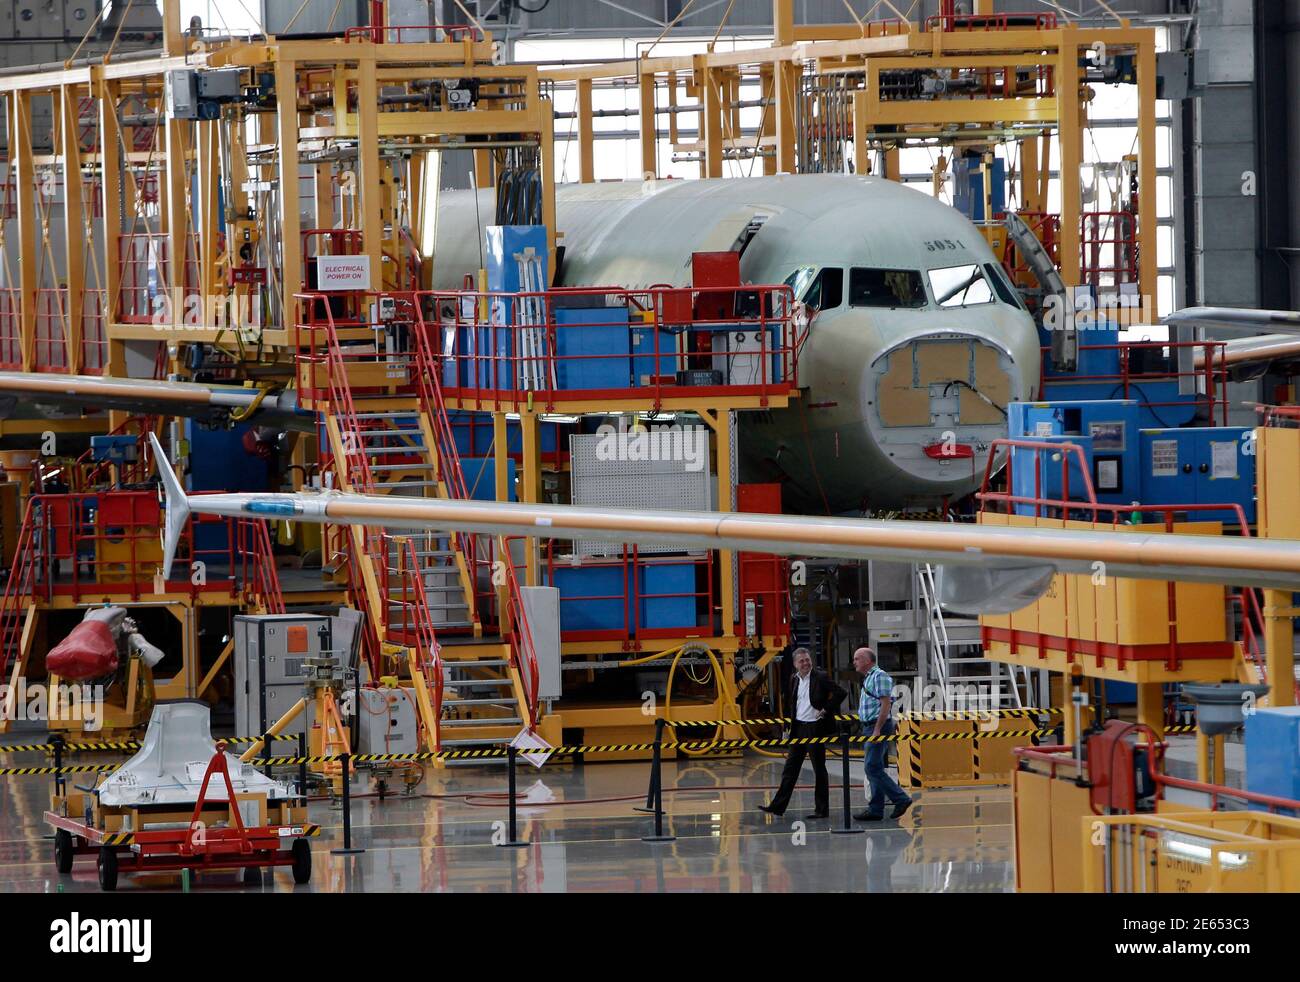 Vistors walk past an A320 plane under construction at the final assembly line of Airbus factory in Tianjin municipality, June 13, 2012. European planemaker Airbus said its total gross aircraft orders stood at 149 from January to May, helped by a contract recently signed with Air Lease for 36 planes. REUTERS/Jason Lee (CHINA - Tags: BUSINESS TRANSPORT) Stock Photo